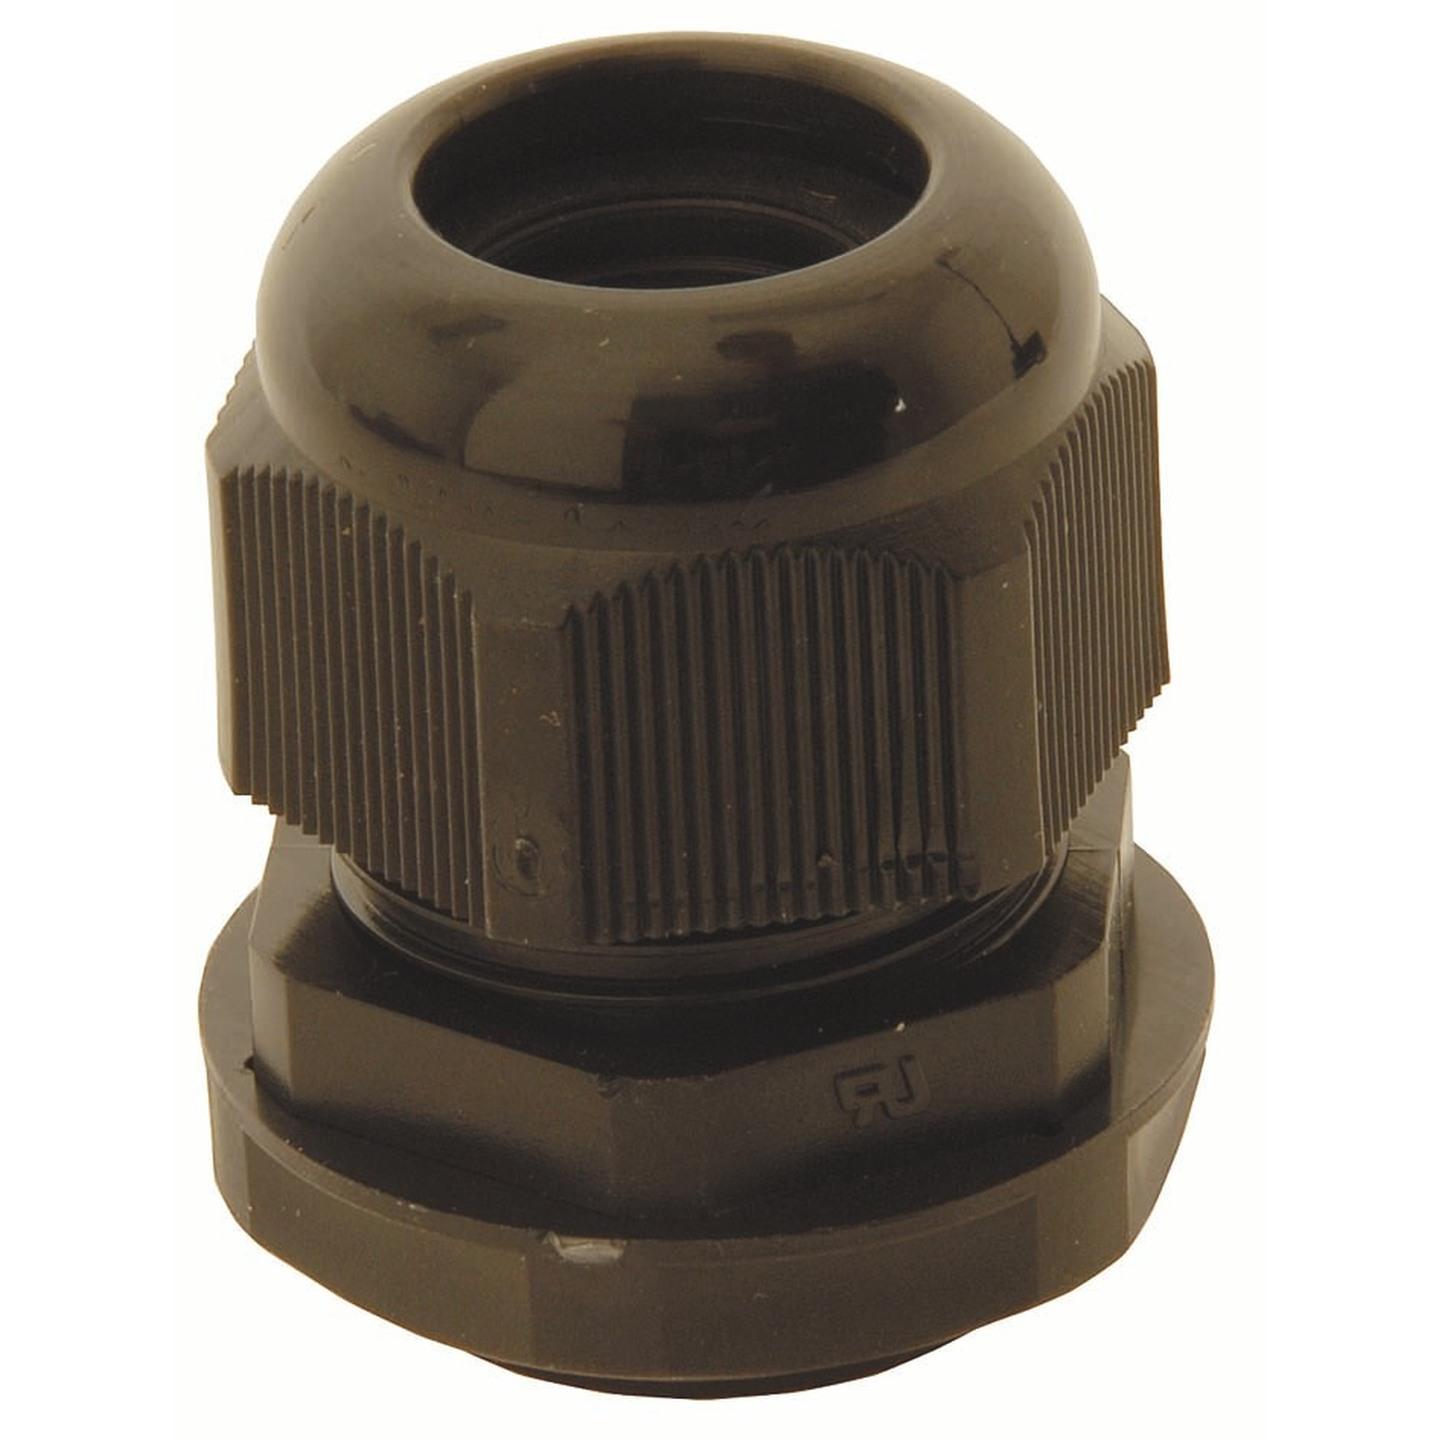 CABLE GLAND 13-18MM BLK PK25